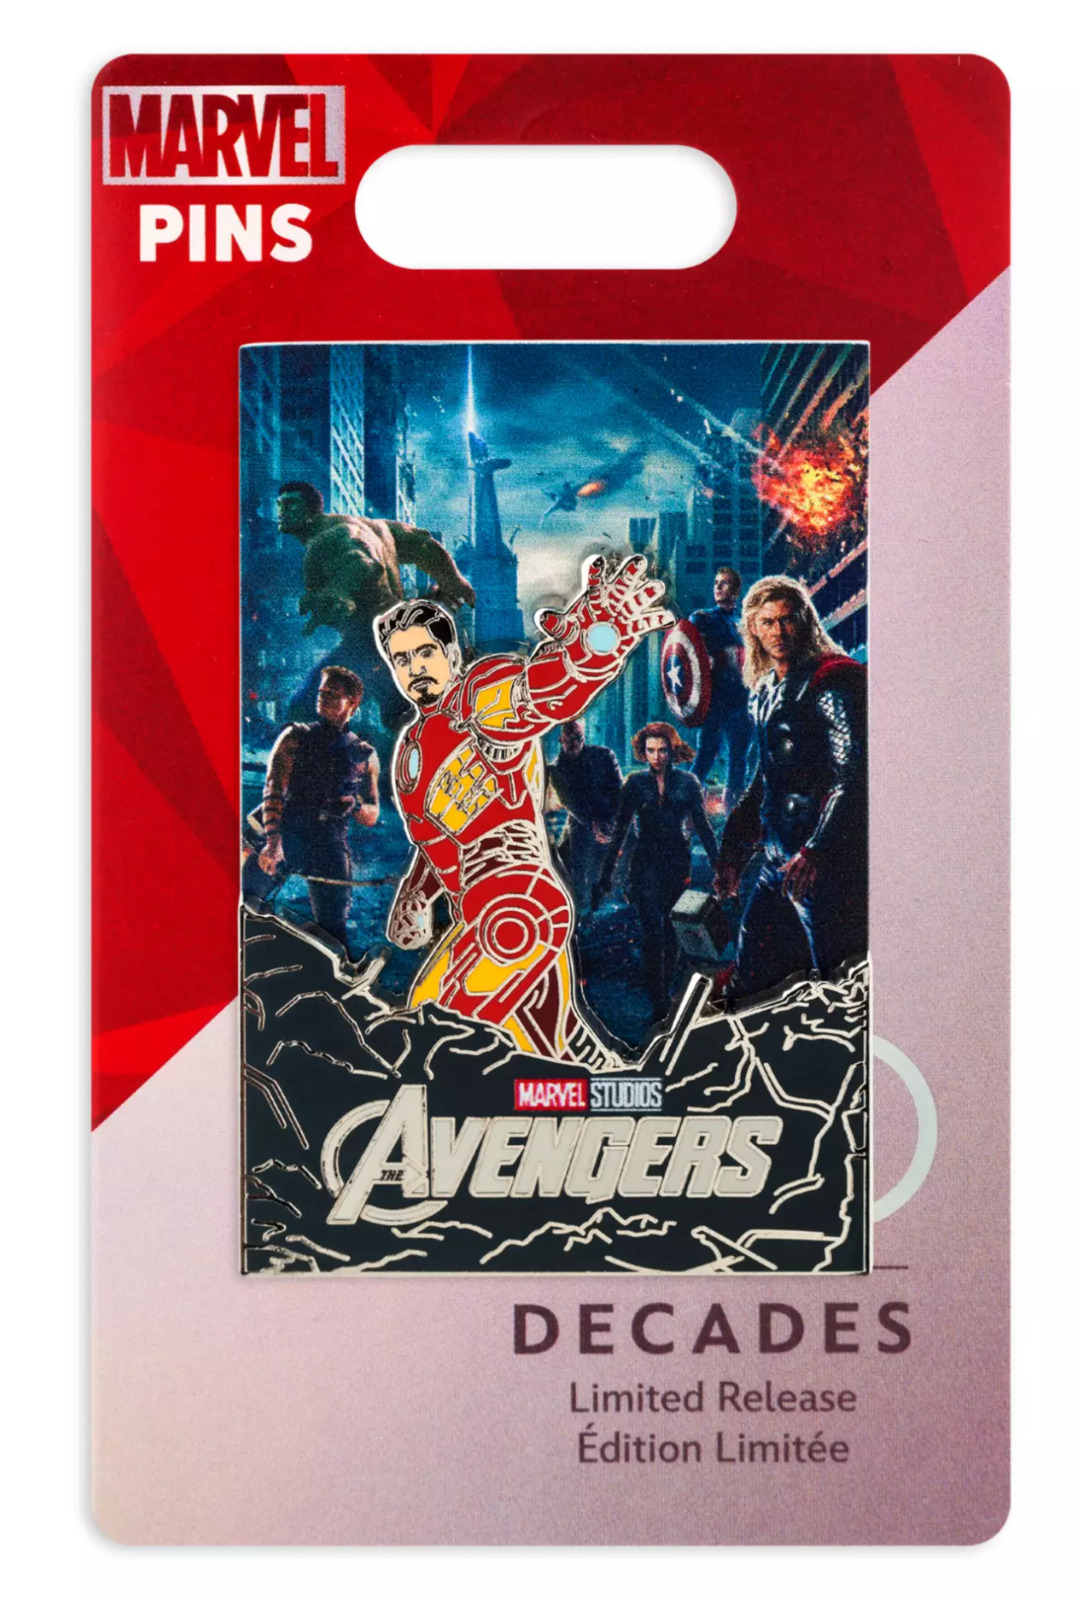 Disney 100 Decades 2010's The Avengers Movie Poster Limited Release Pin